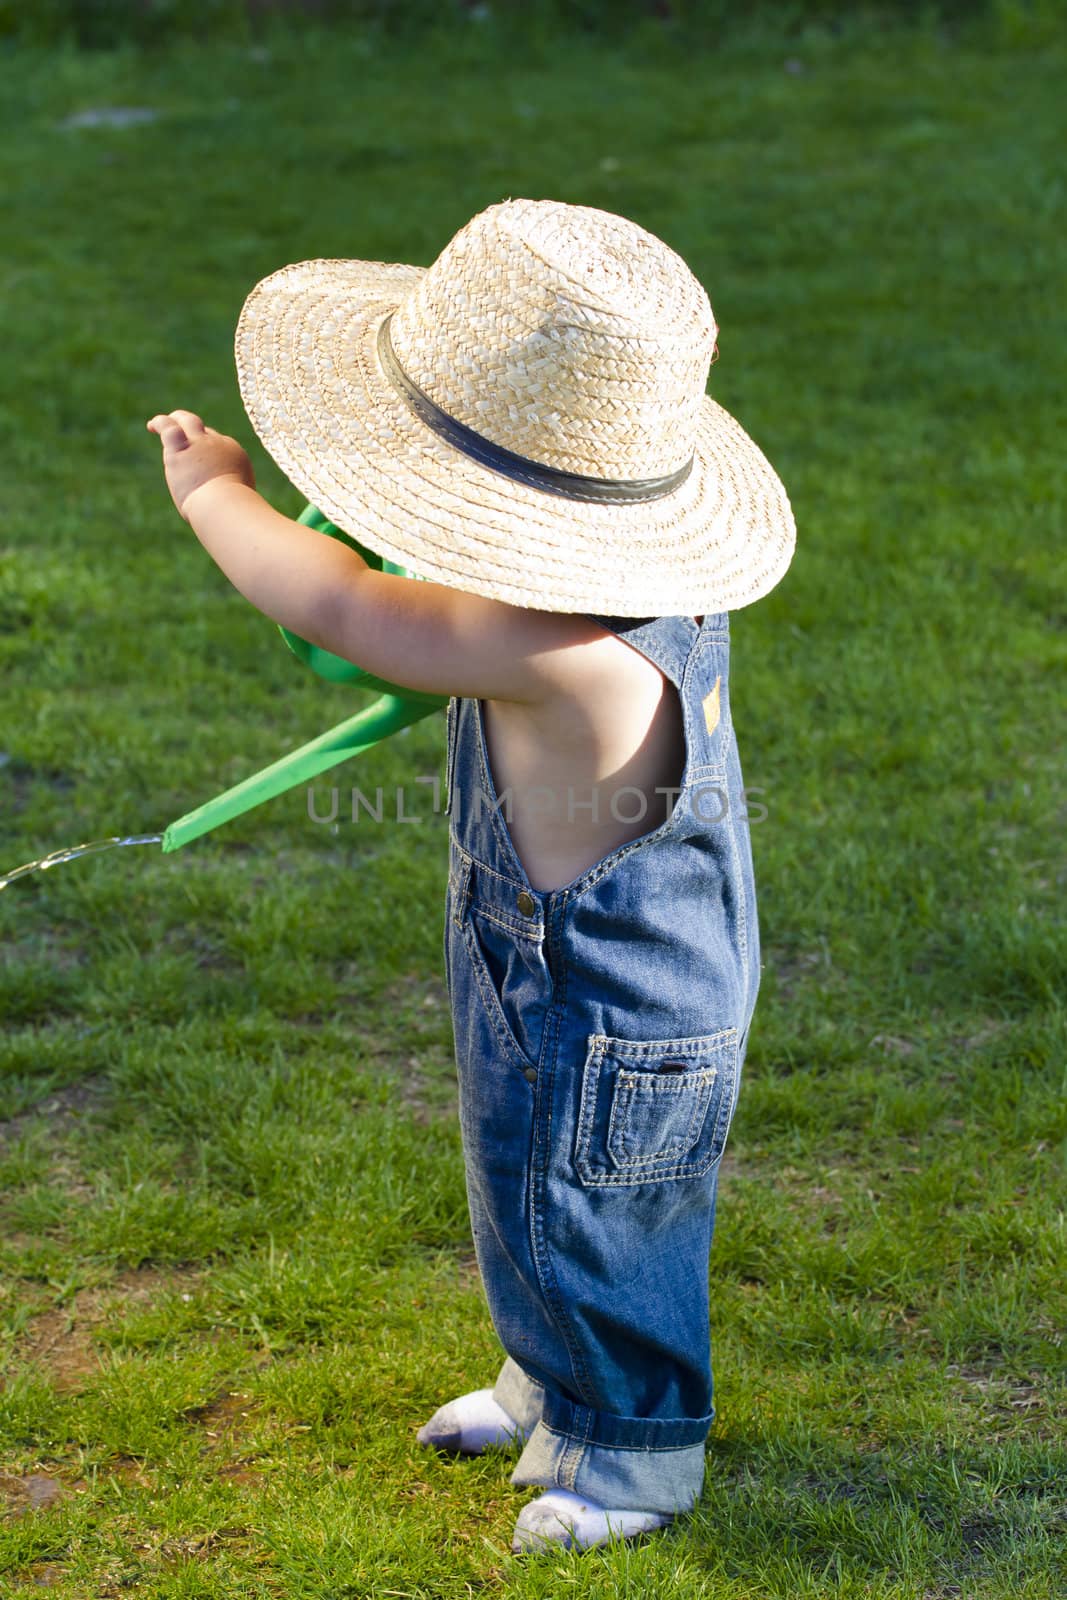 A boy with straw hat, a young gardener enjoying the spring